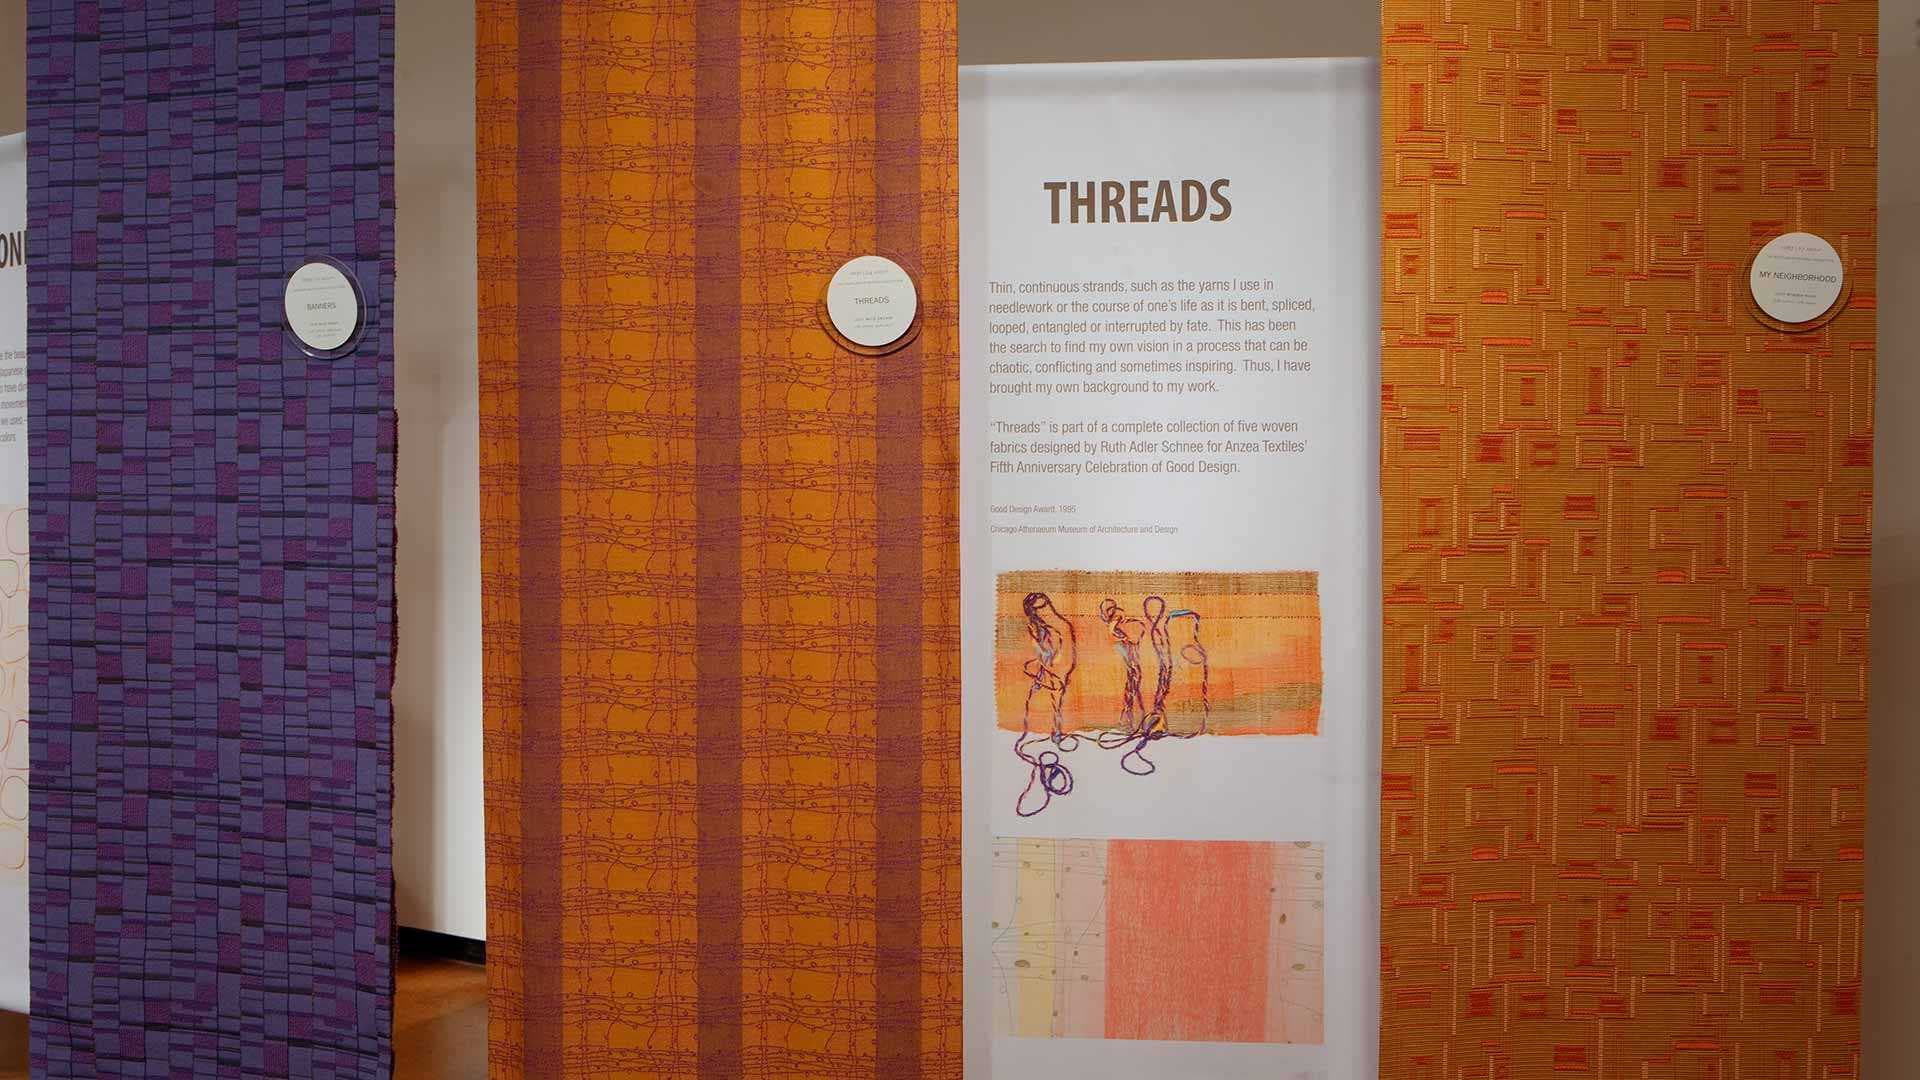 sign from “Ruth Adler Schnee: A Passion for Color & Design” exhibition showing orange threads